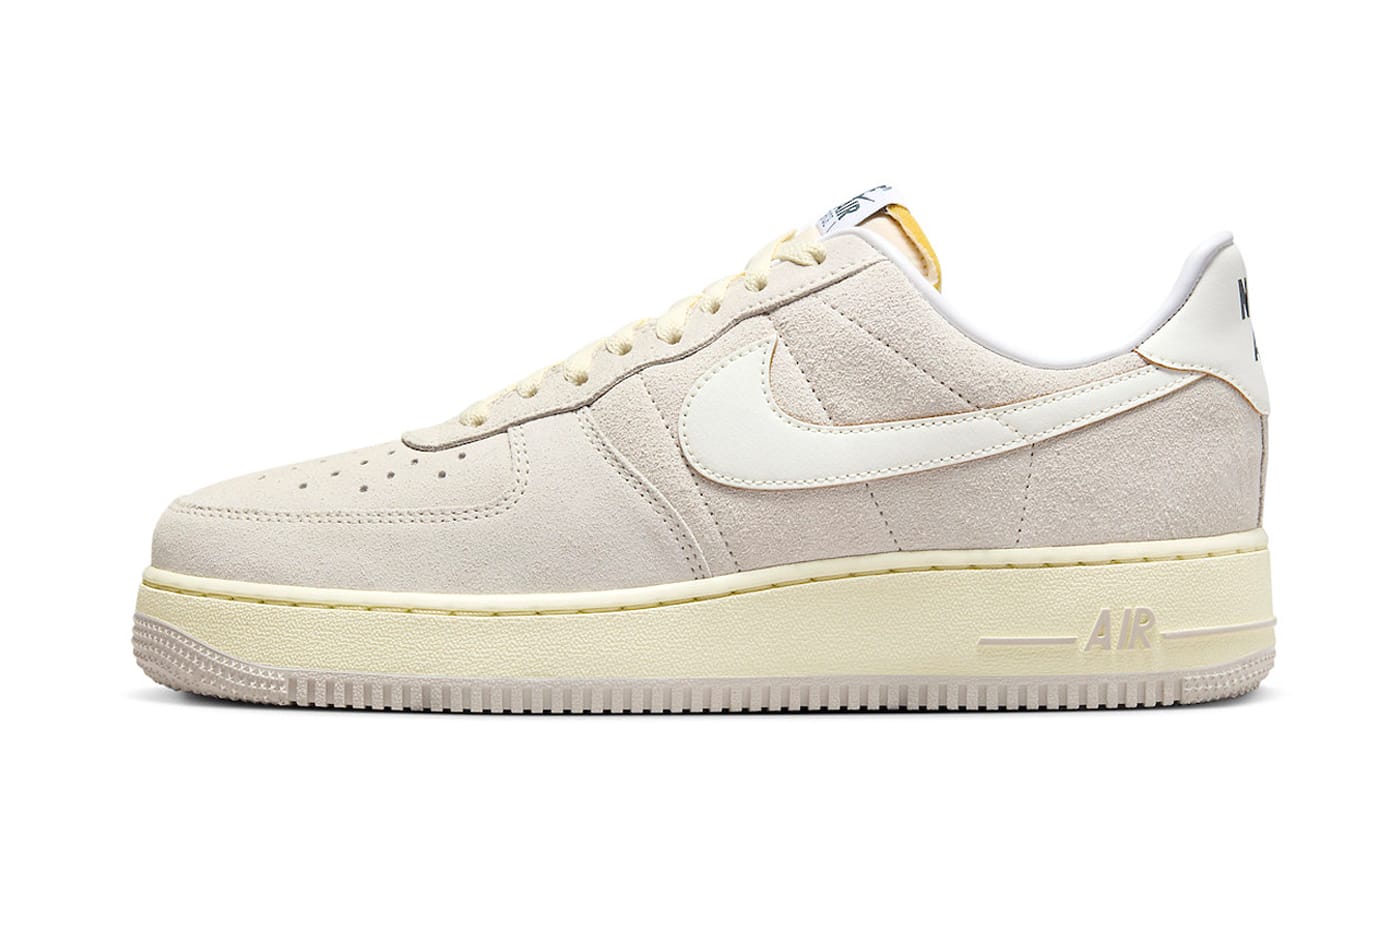 Nike Air Force 1 Low “Athletic Department” Release Info | Hypebeast